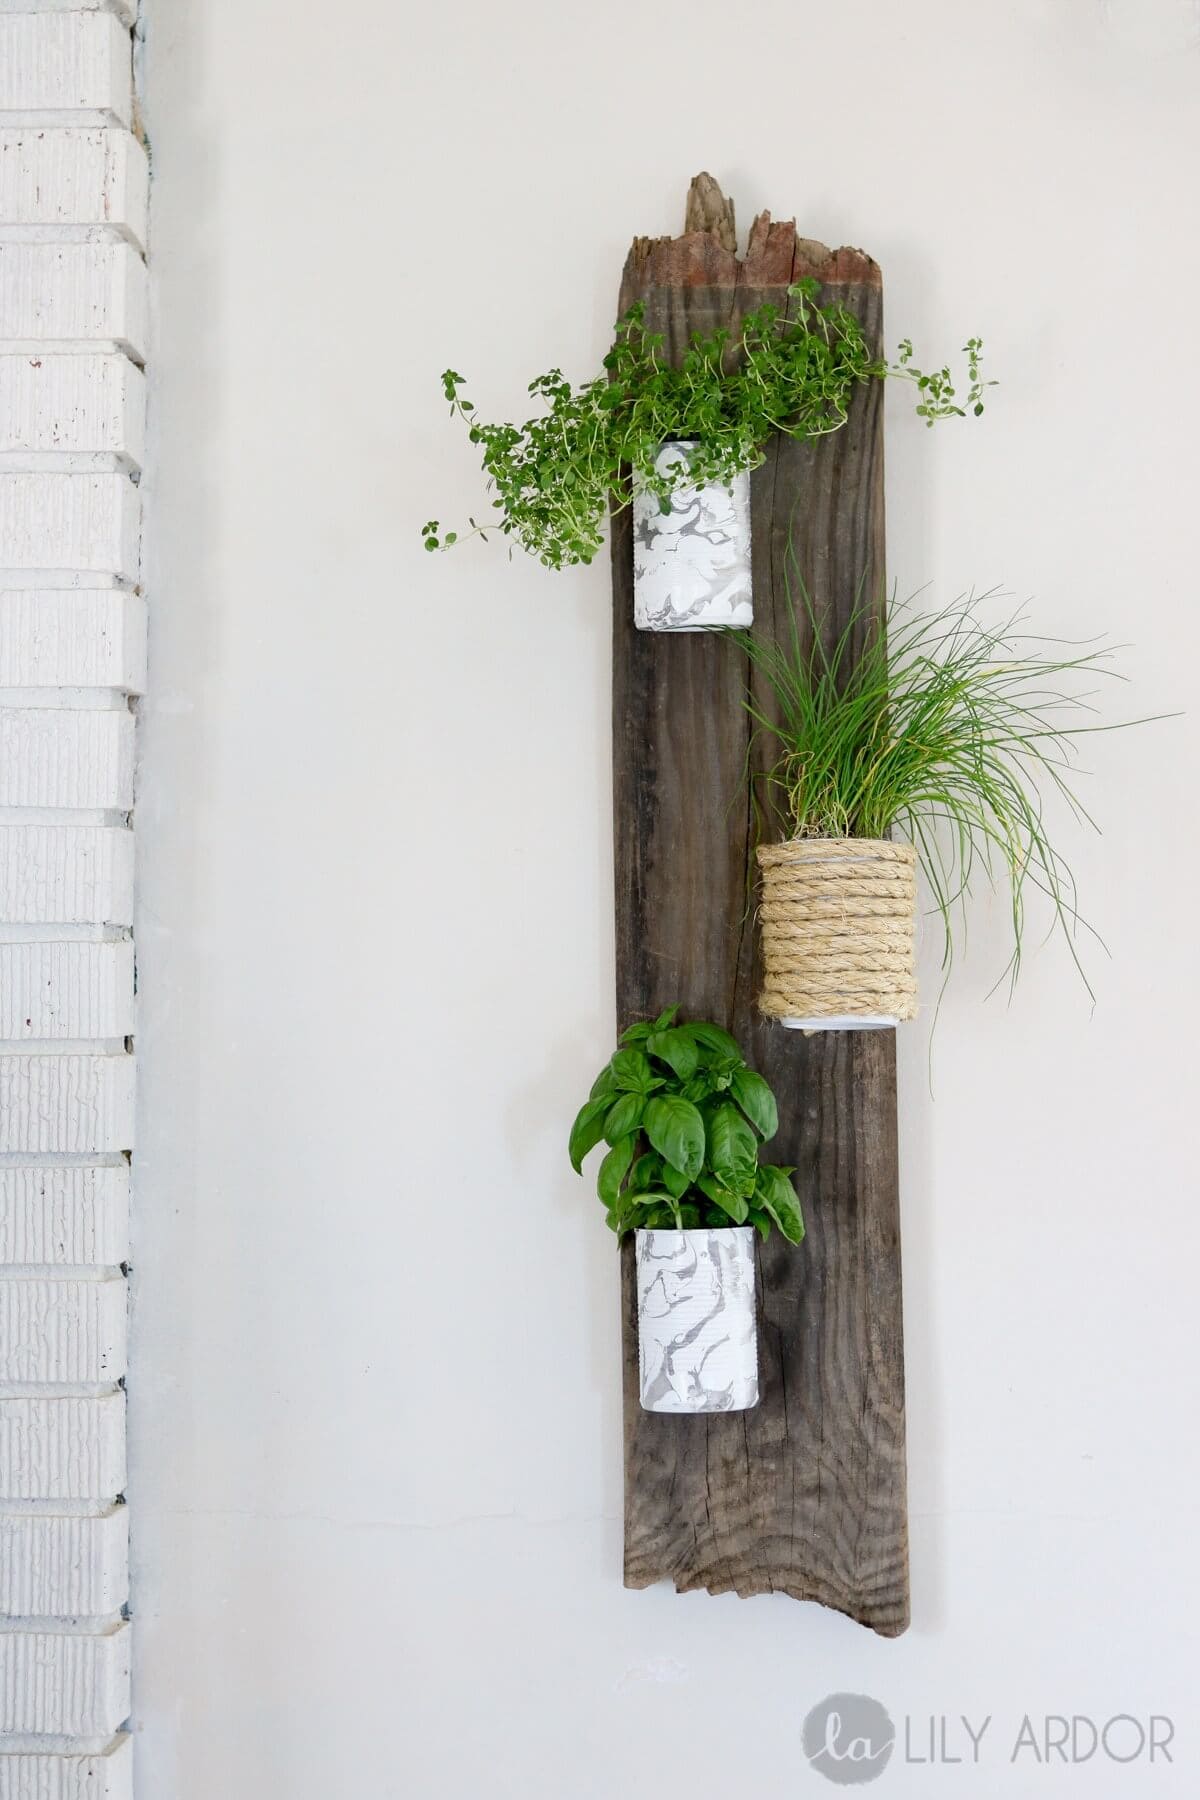 23 impressive hanging vases and planters ideas to decorate your boring wall - 75